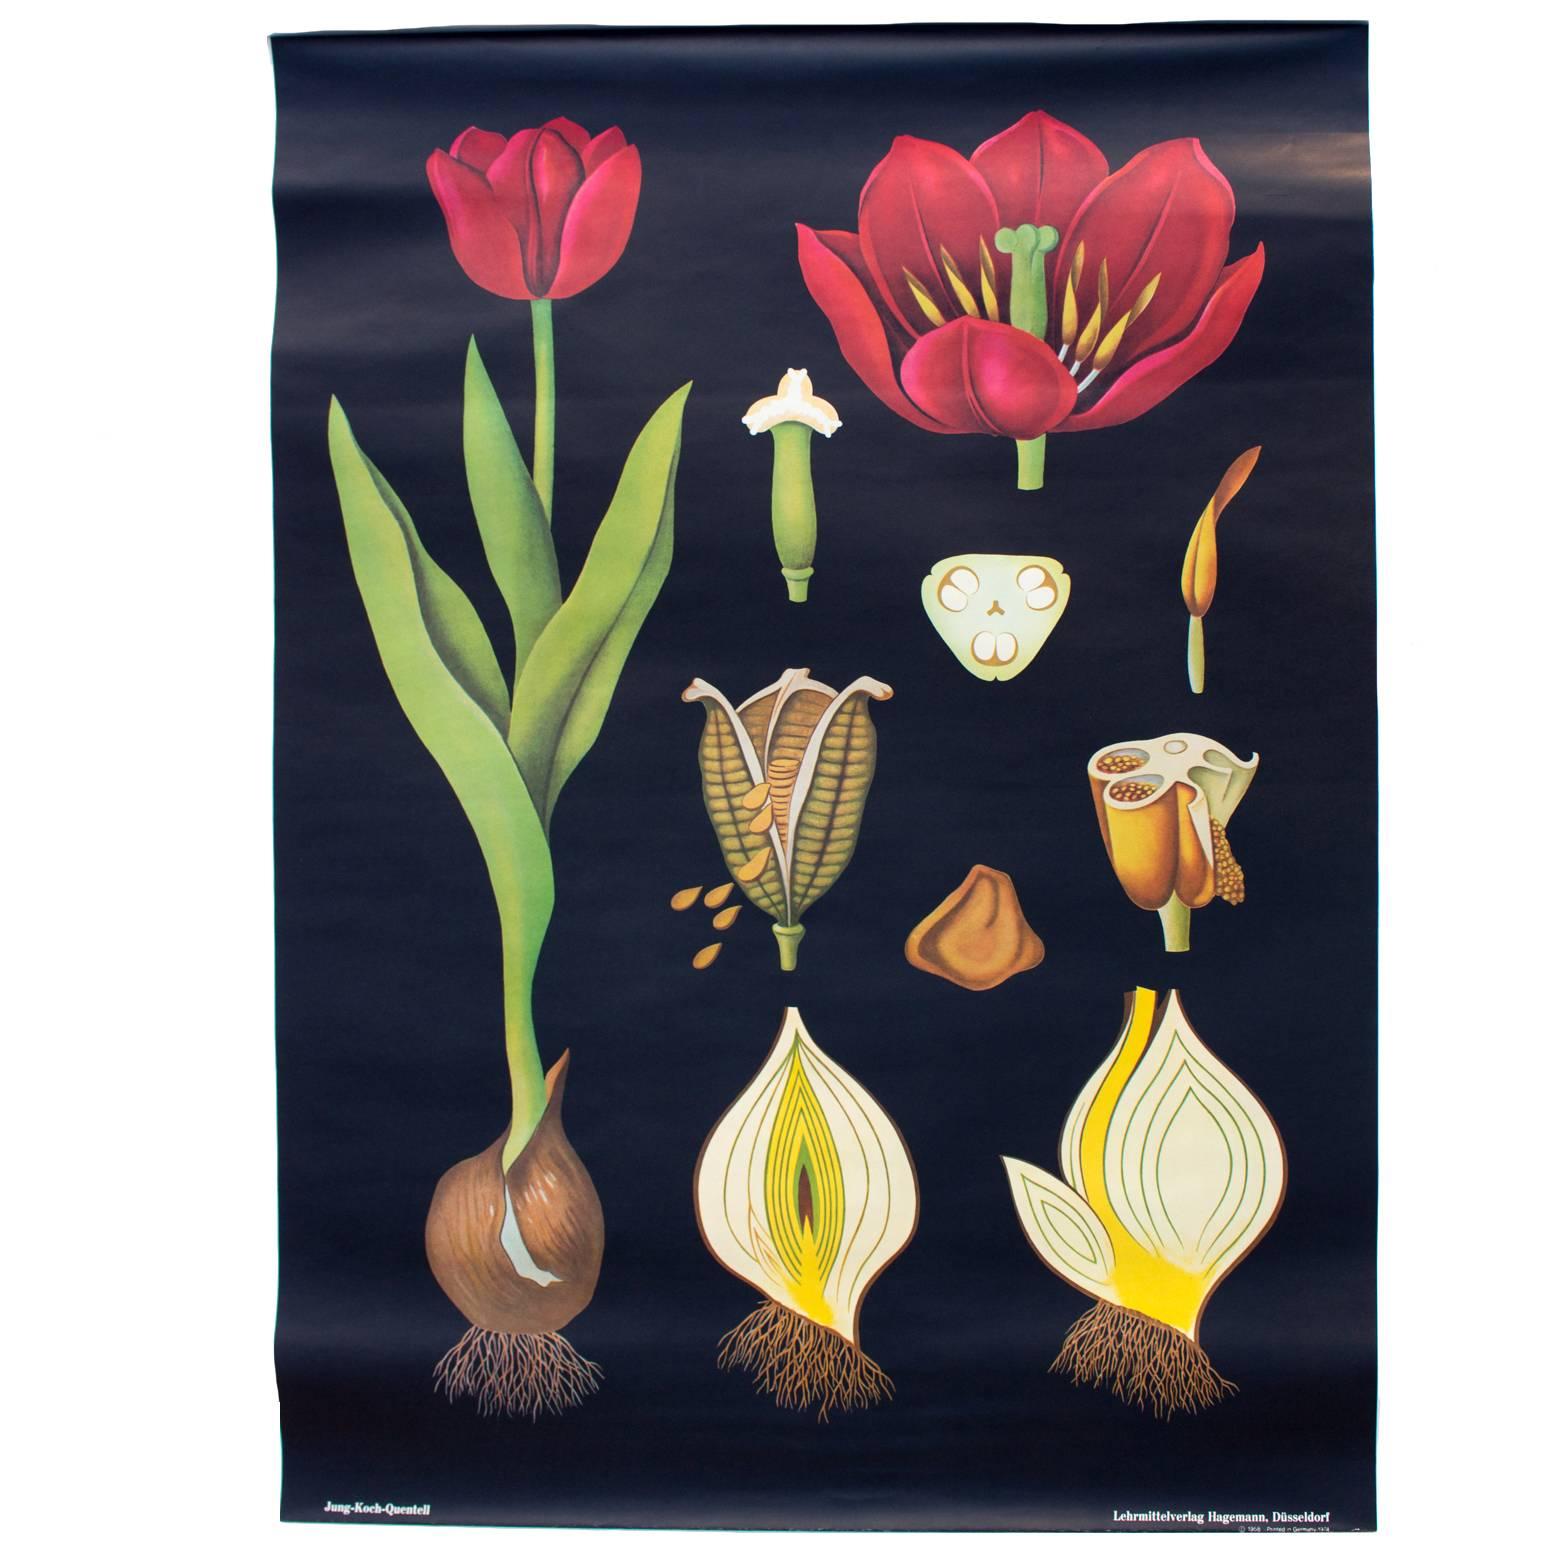 Vintage Wall Chart, Tulip from Jung-Koch-Quentell, 1974 For Sale